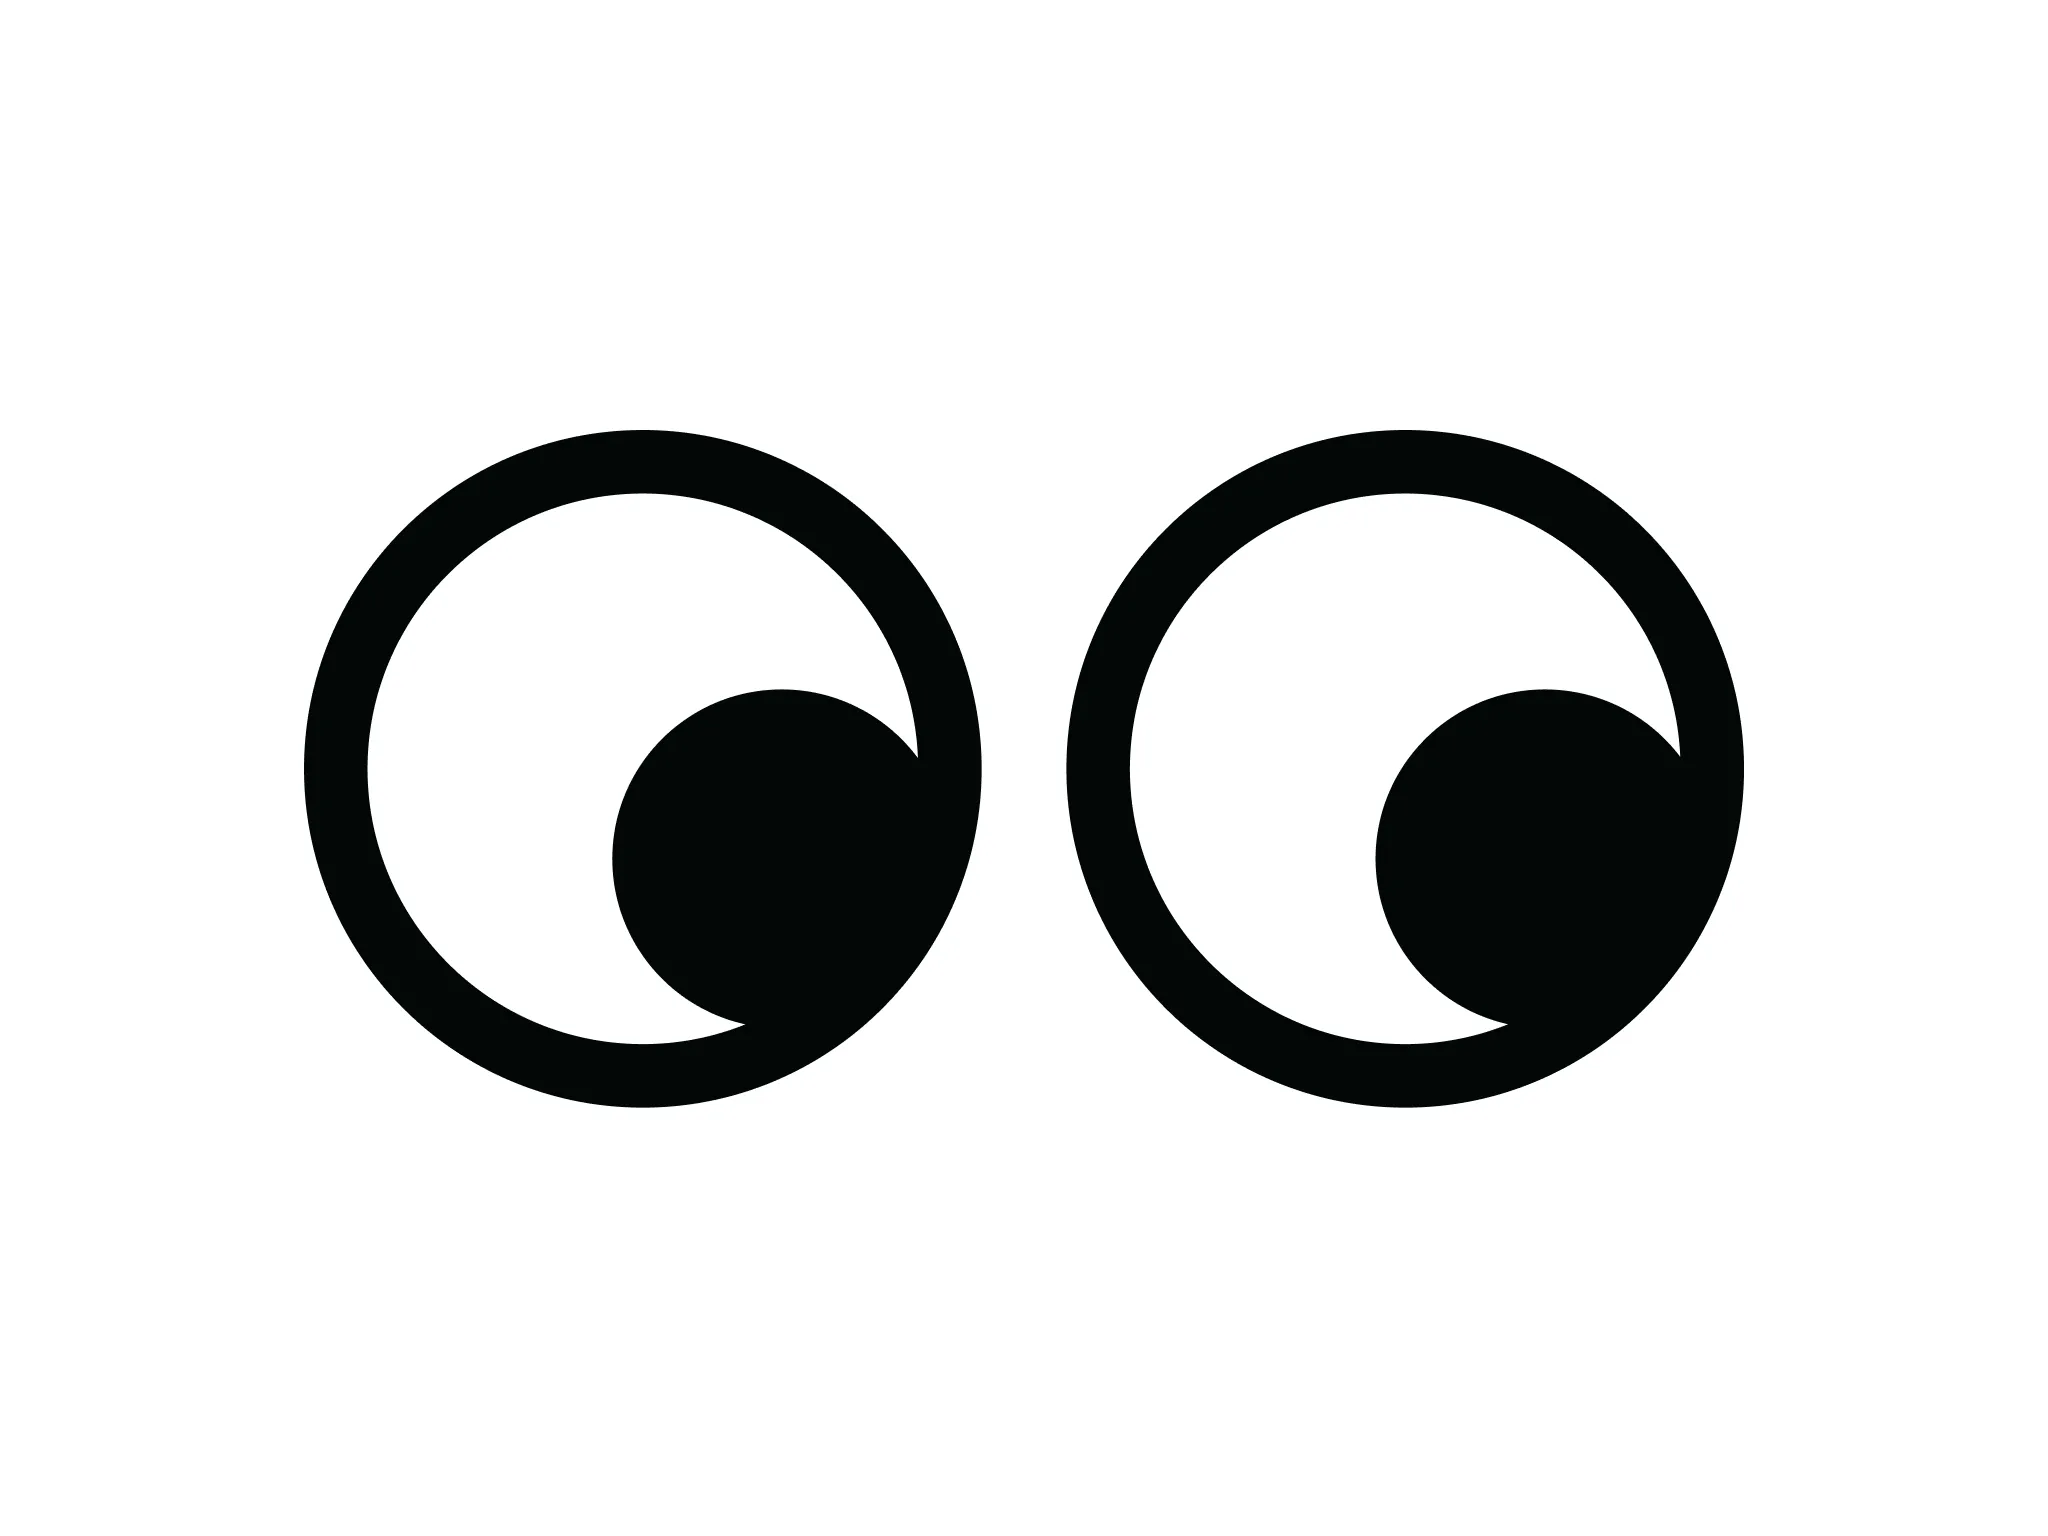 Two cartoon googley eyes looking to the right